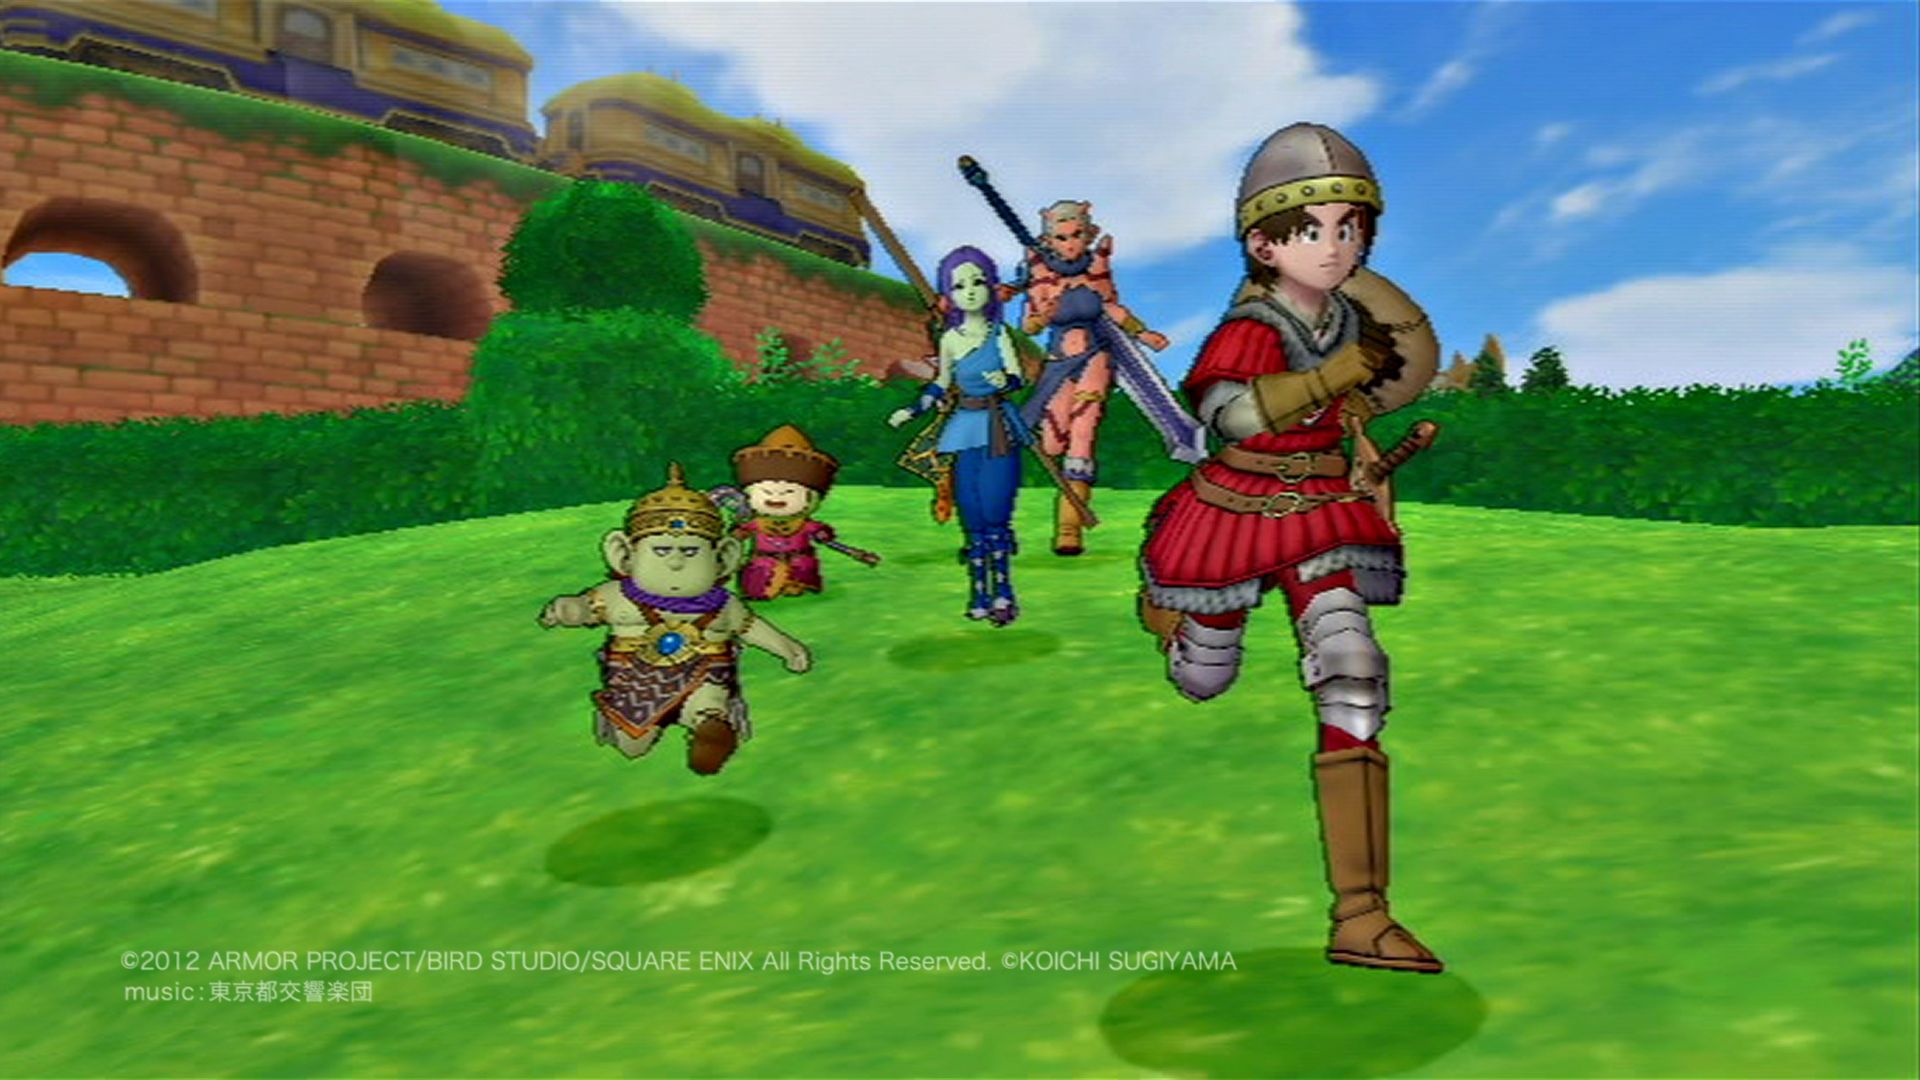 Dragon Quest X PS4 Is Now Able To Be Played In The US, No VPN Needed